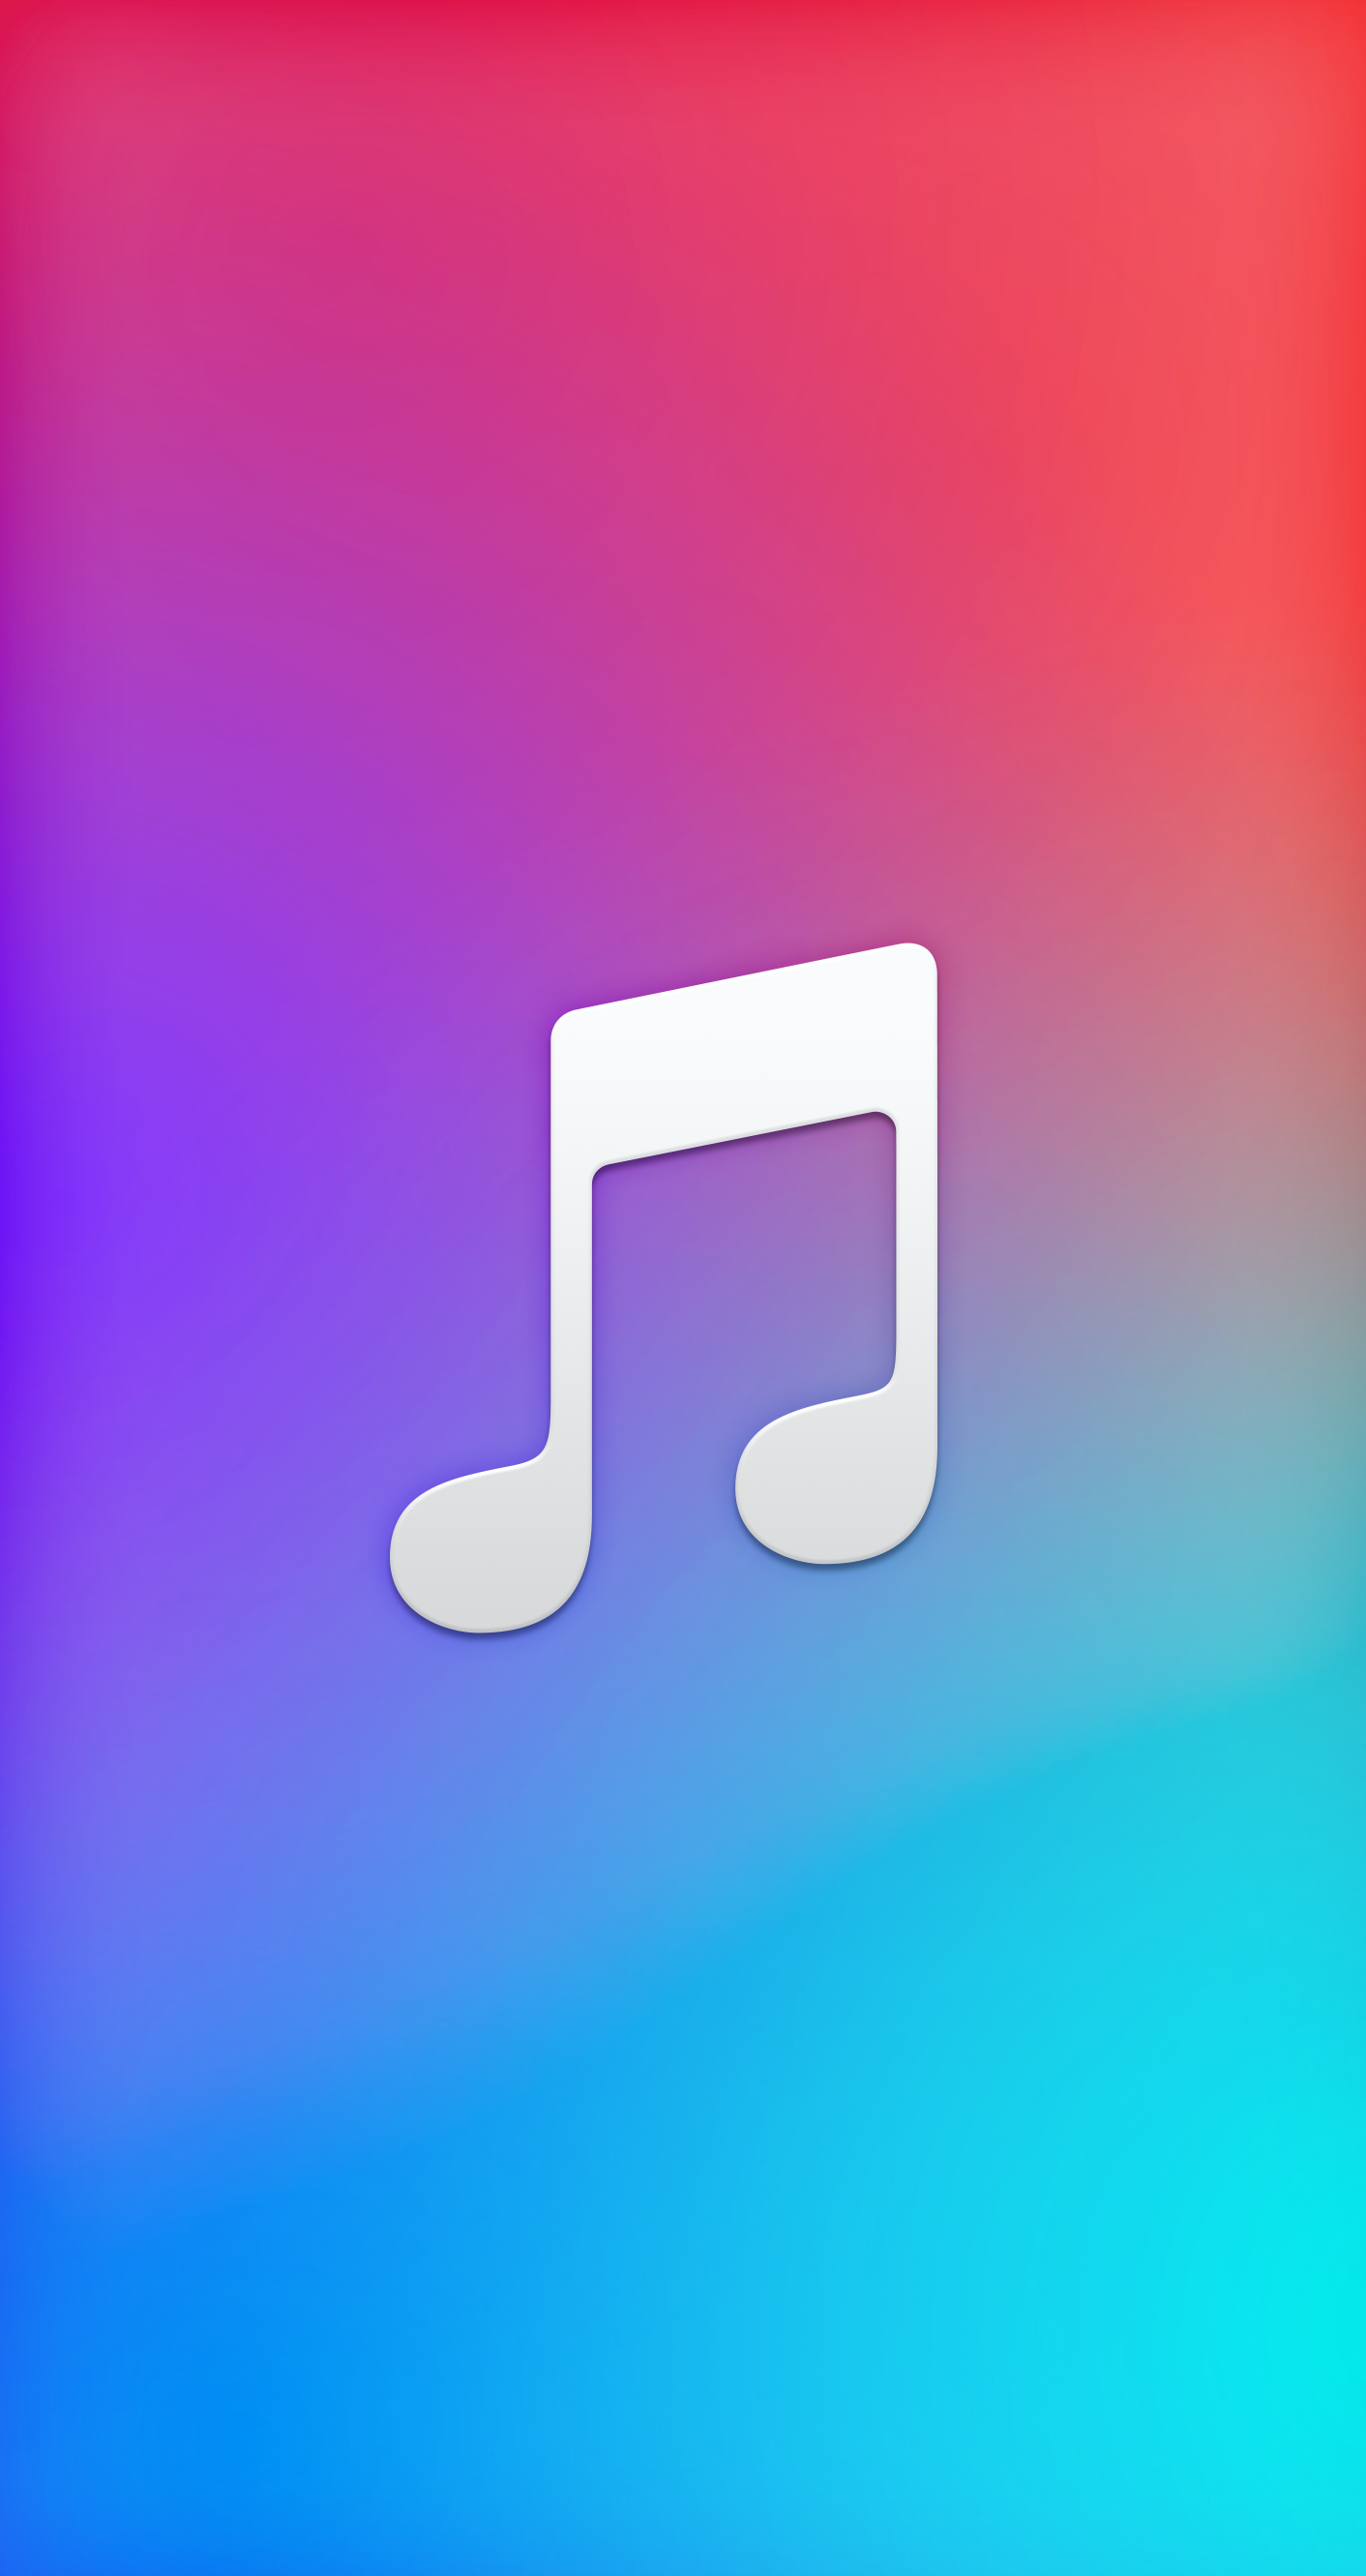 Apple Music inspired wallpapers for iPad, iPhone, and Apple Watch